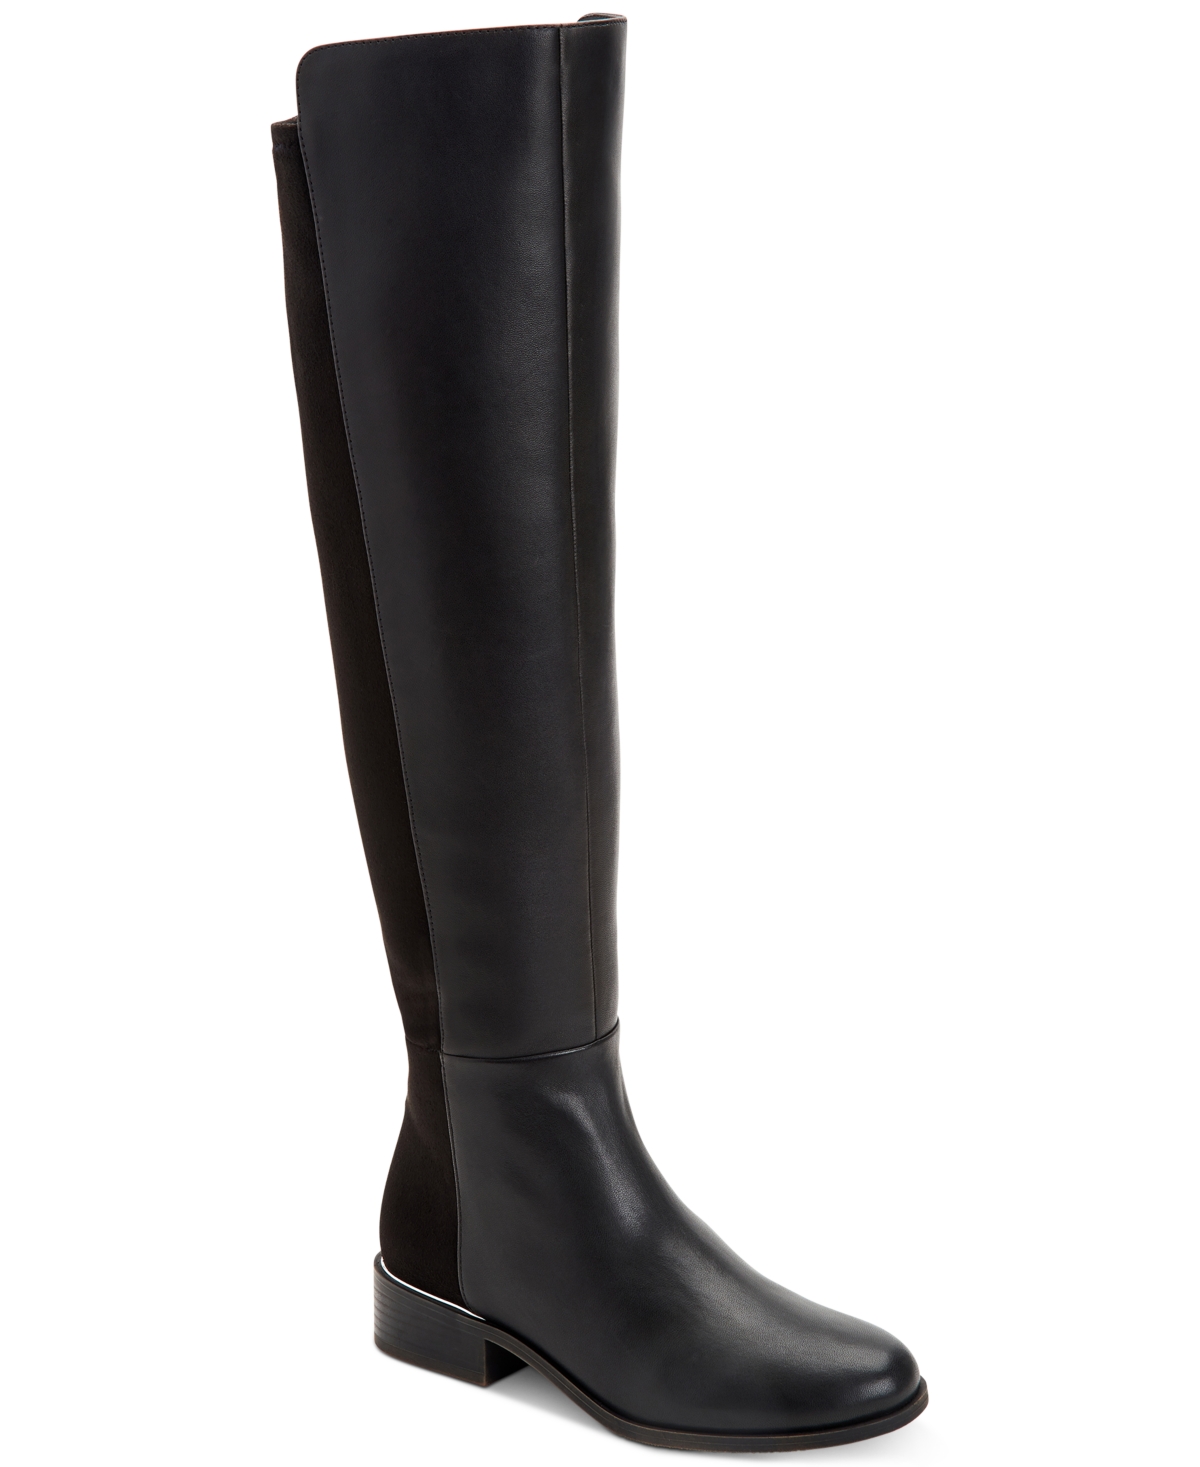 Women's Ludlowe Over-The-Knee Boots, Created for Macy's - Black Leather/ Micro